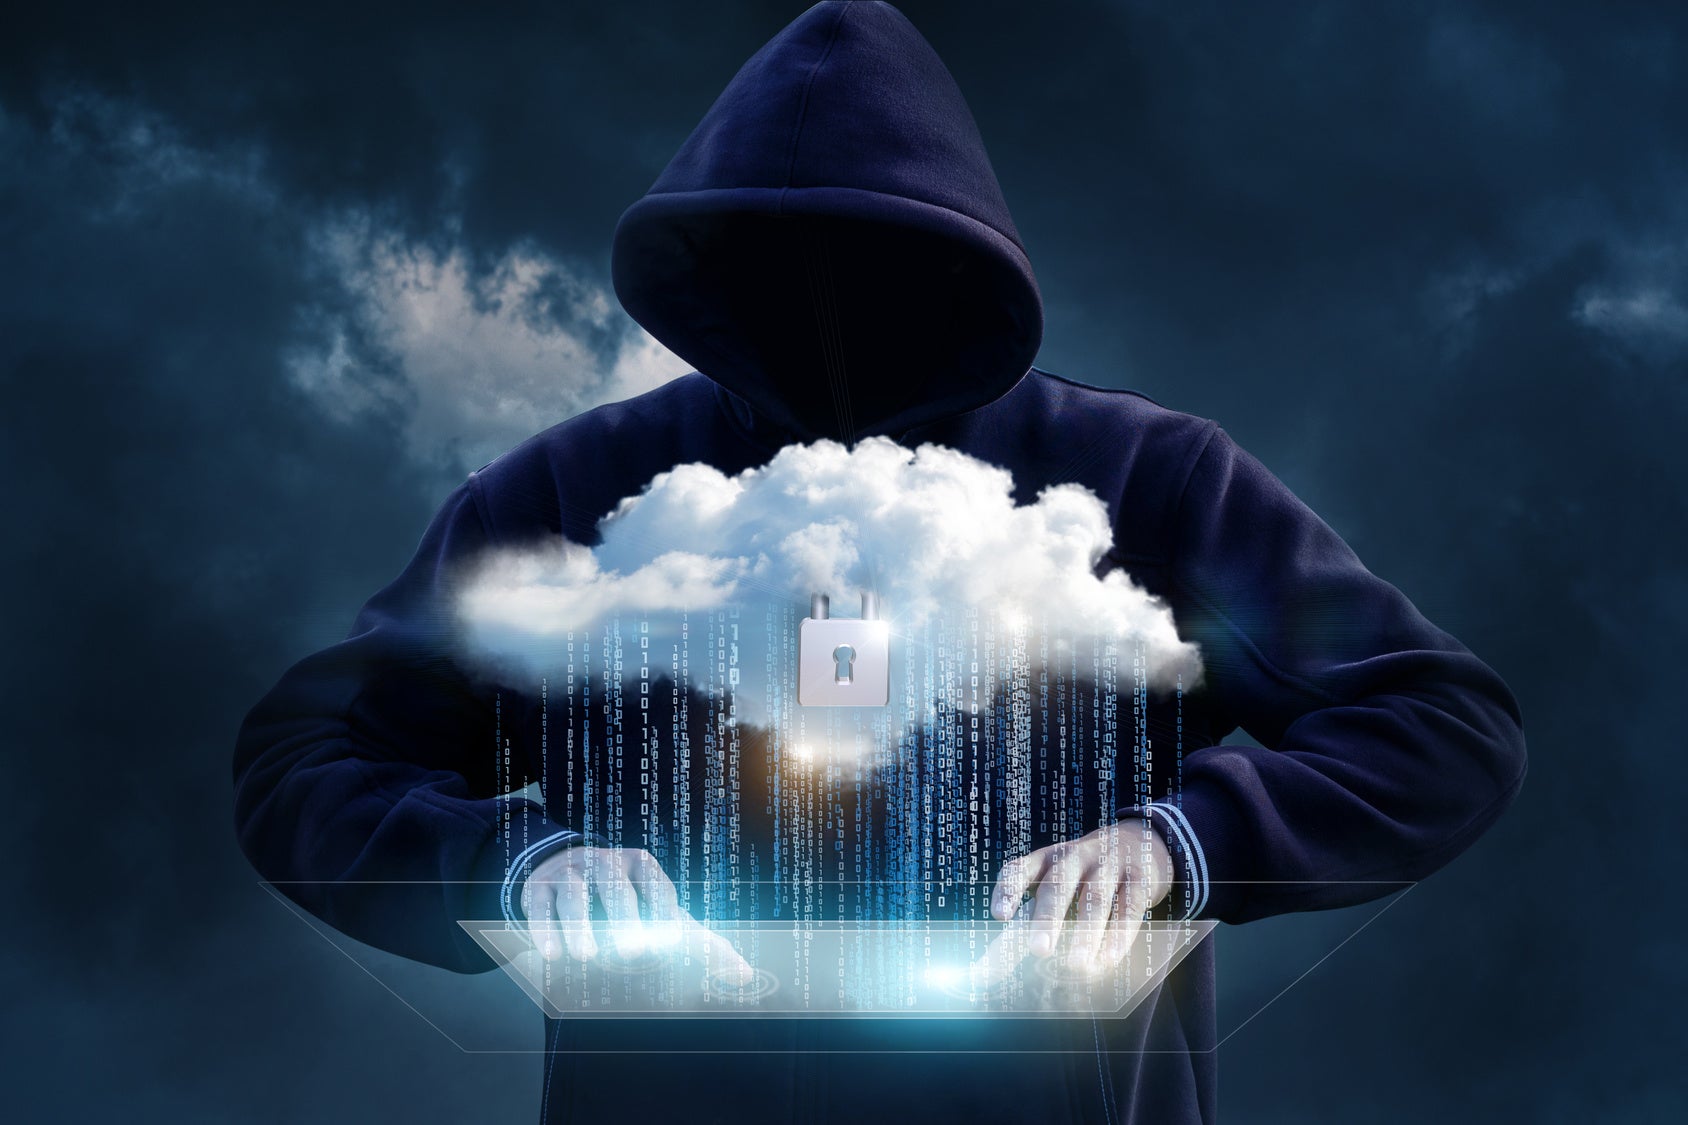 Getting enterprise-scale cloud security right